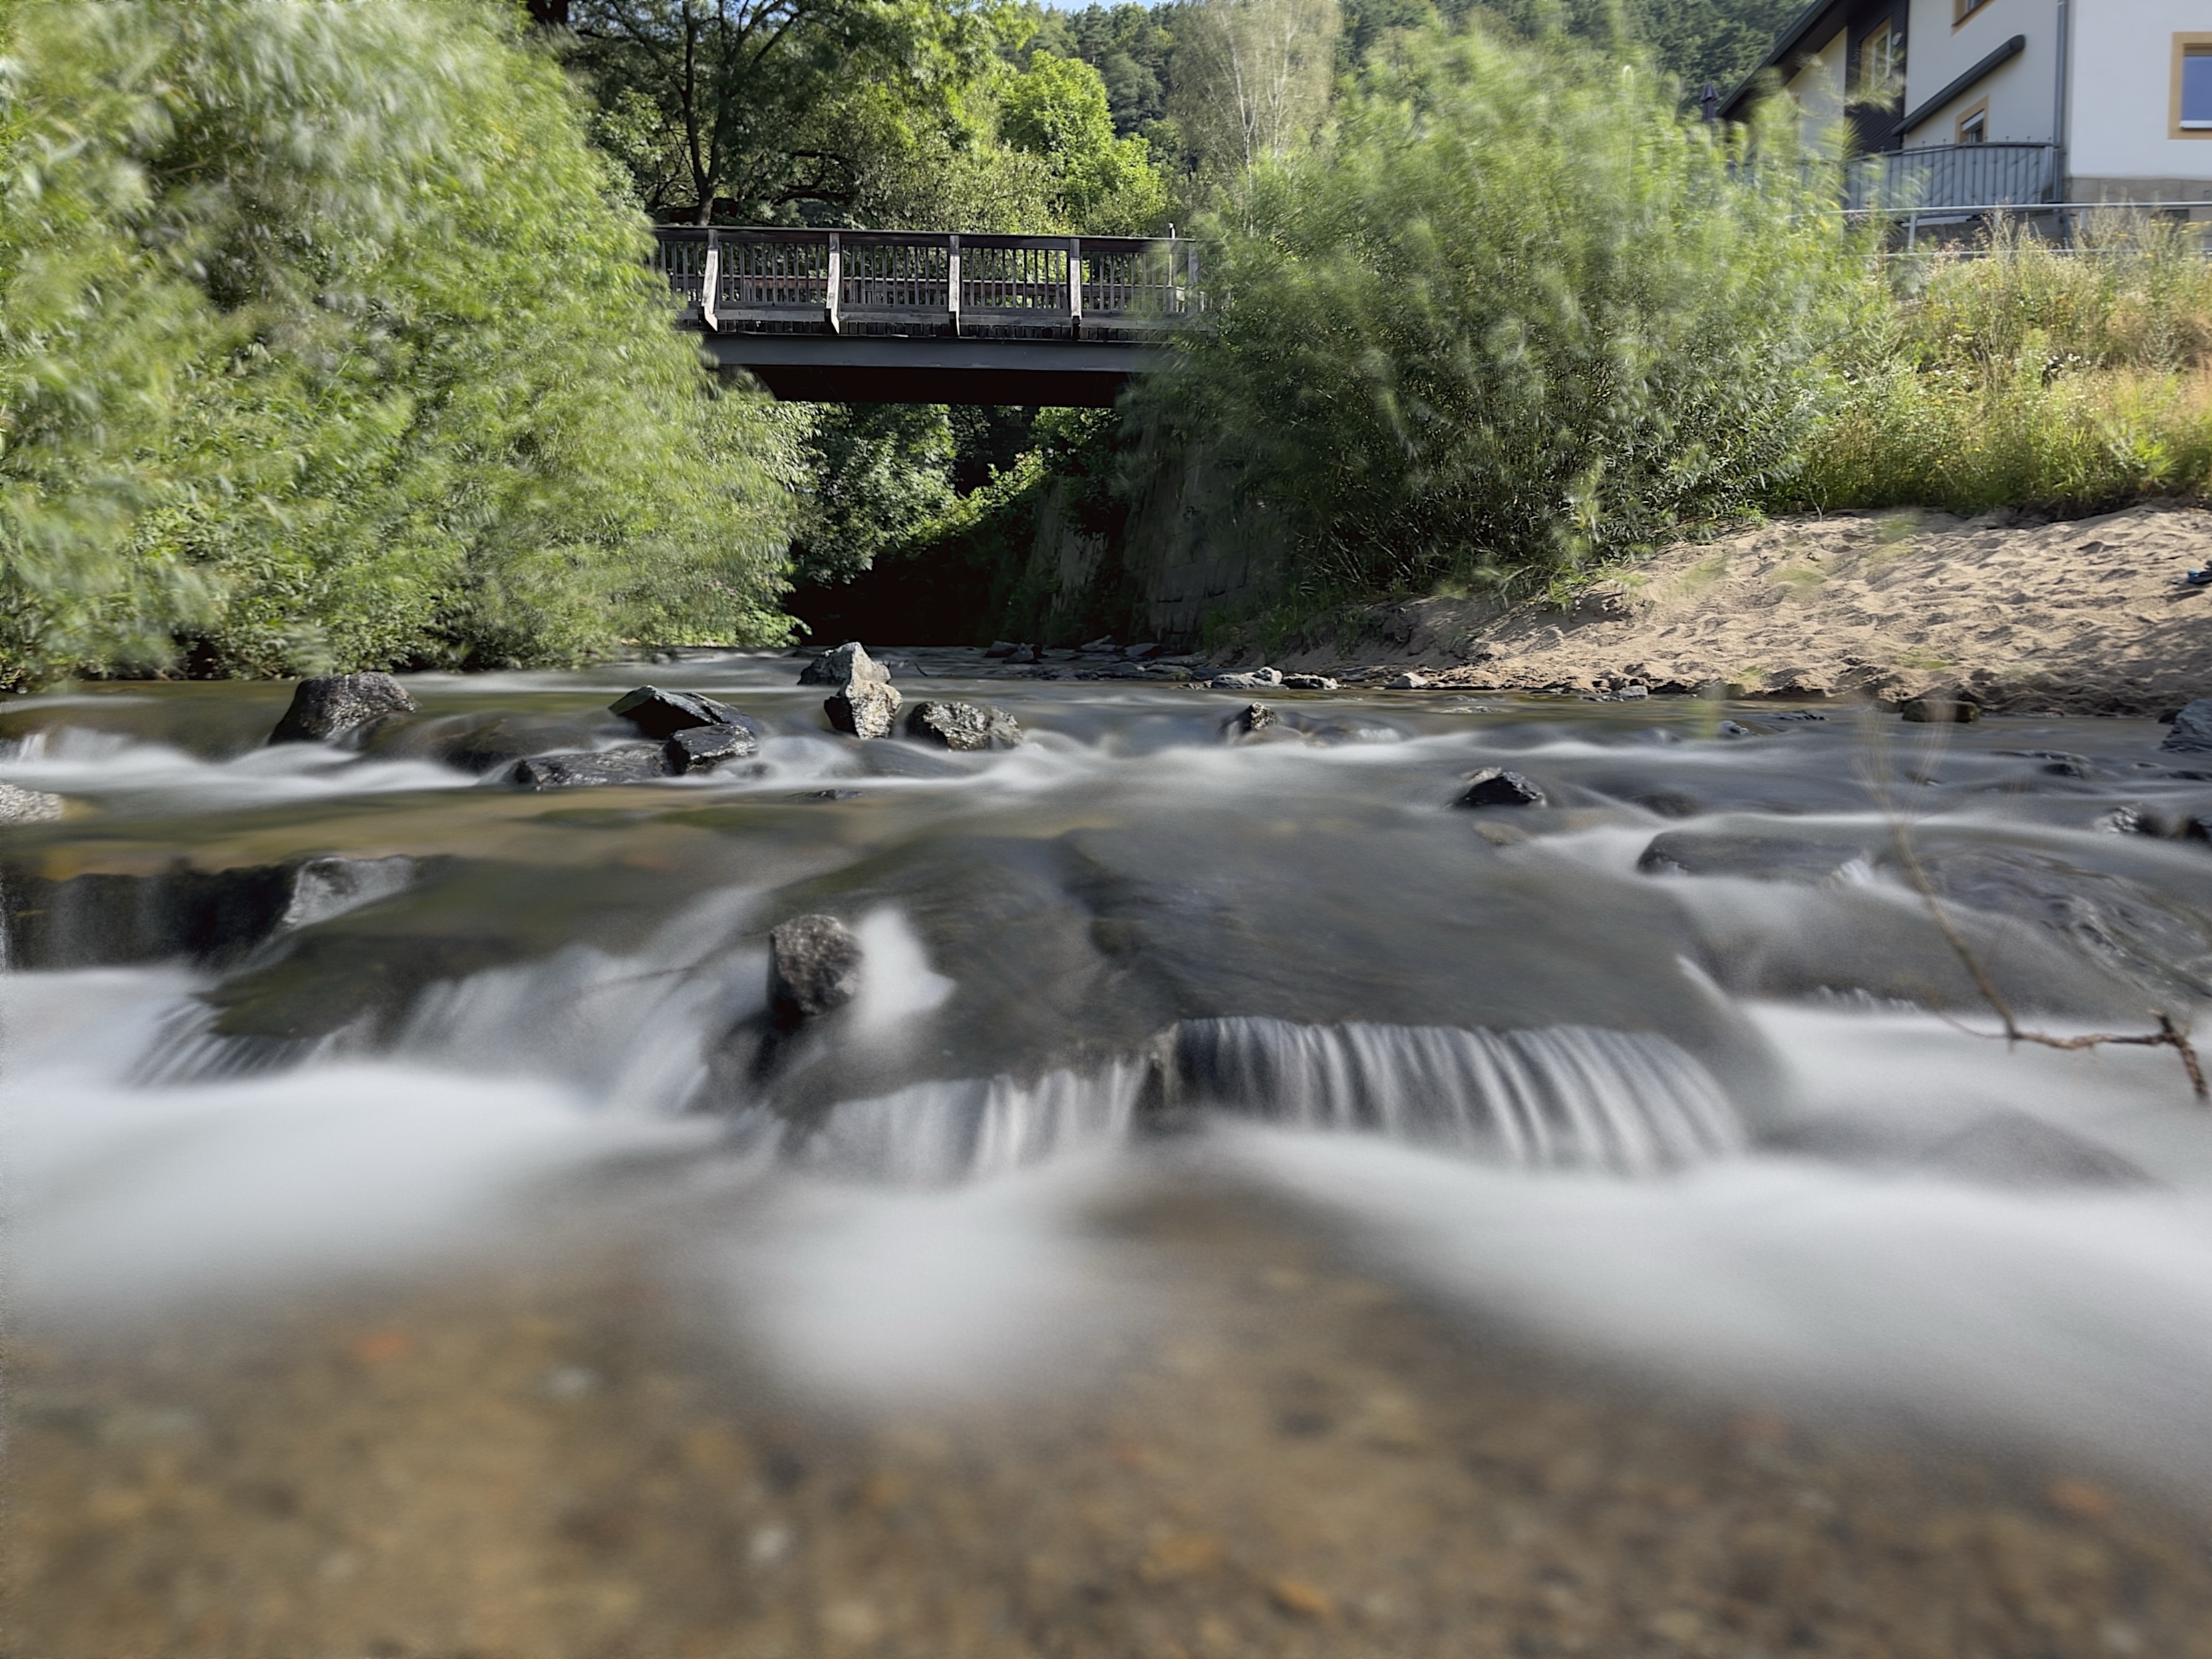 A serene creek flows over rocks under a pedestrian bridge, surrounded by lush greenery and a building visible on the right side.